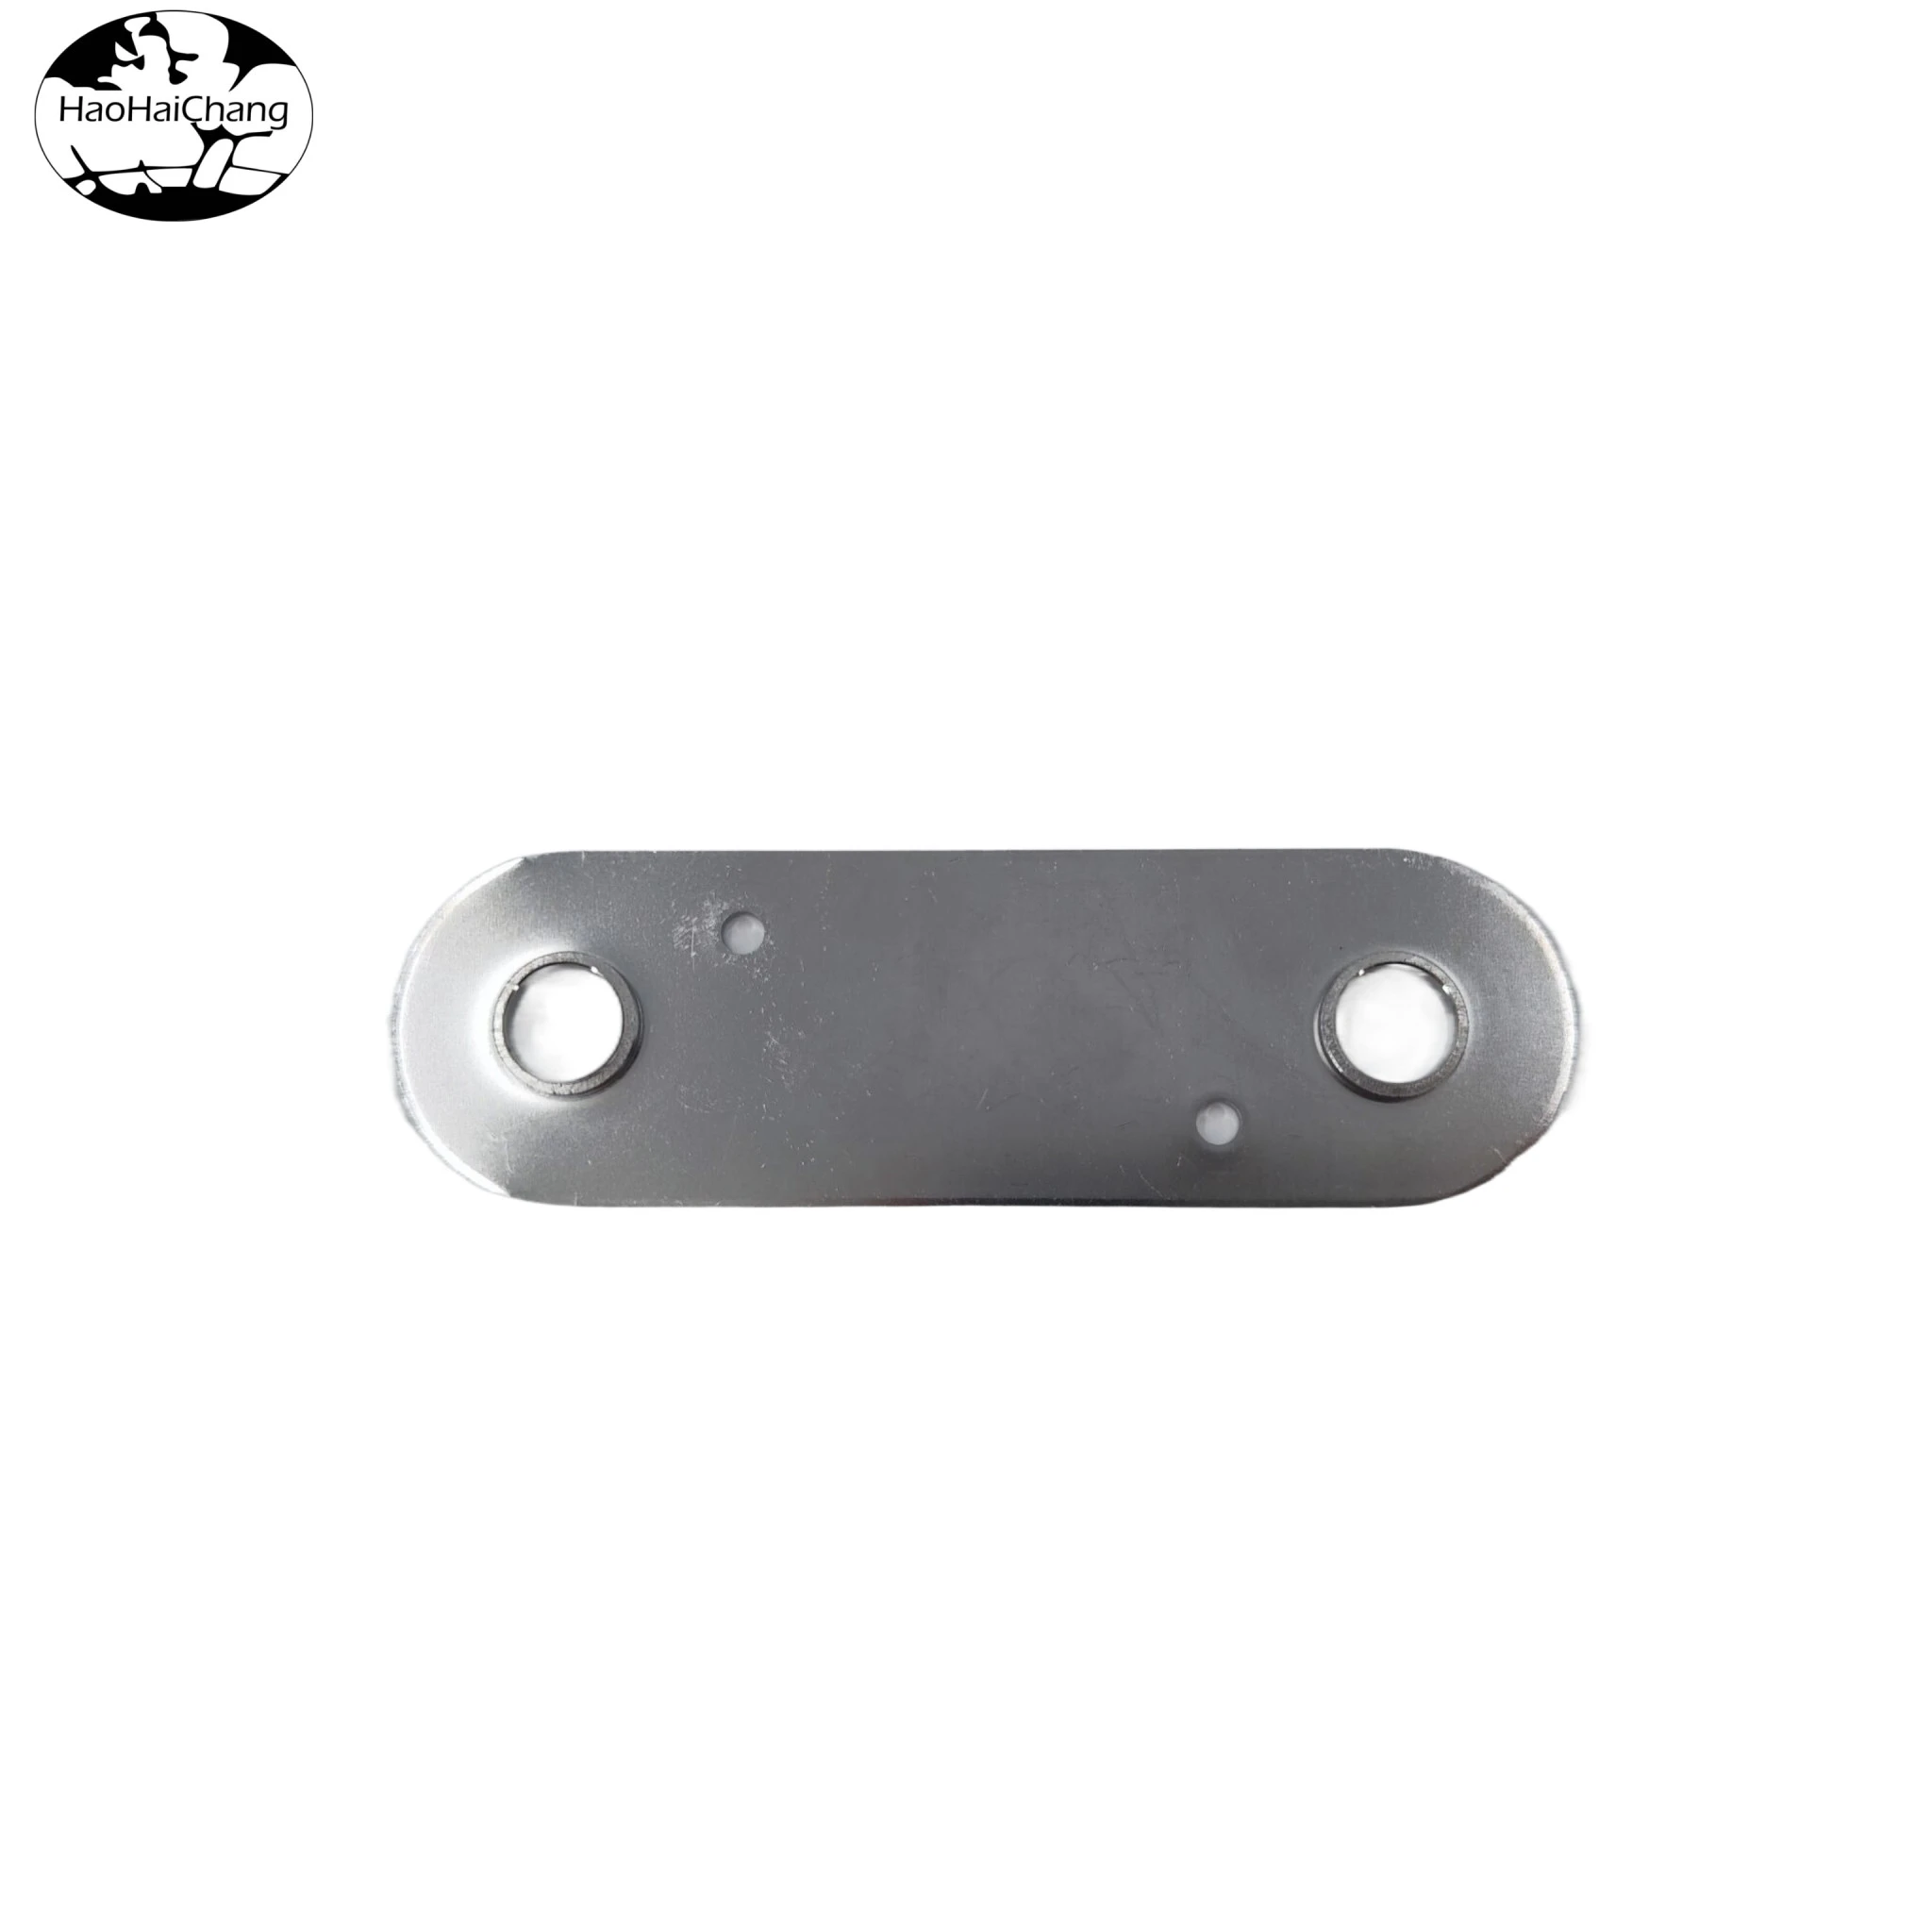 HHC-569 Stainless Steel Flange Bracket Connector